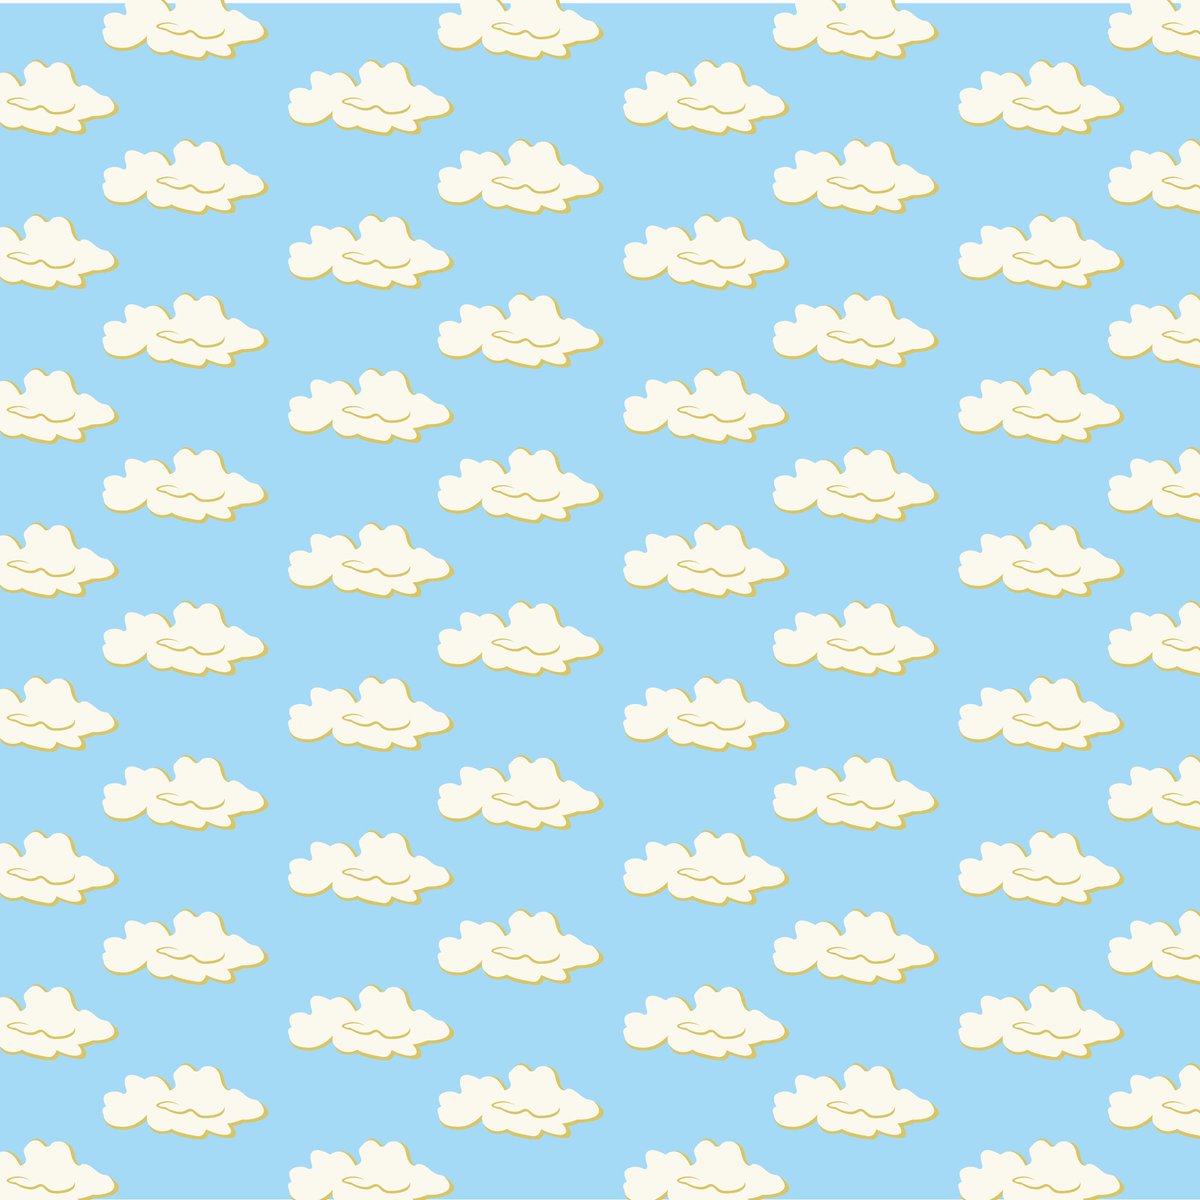 Another Wallcovering design, for a children’s room. Now available for licensing.
.
.
#wallcovering #pattern #patterdesign #graphicdesign #licensing #clouds #childrensroomdecor